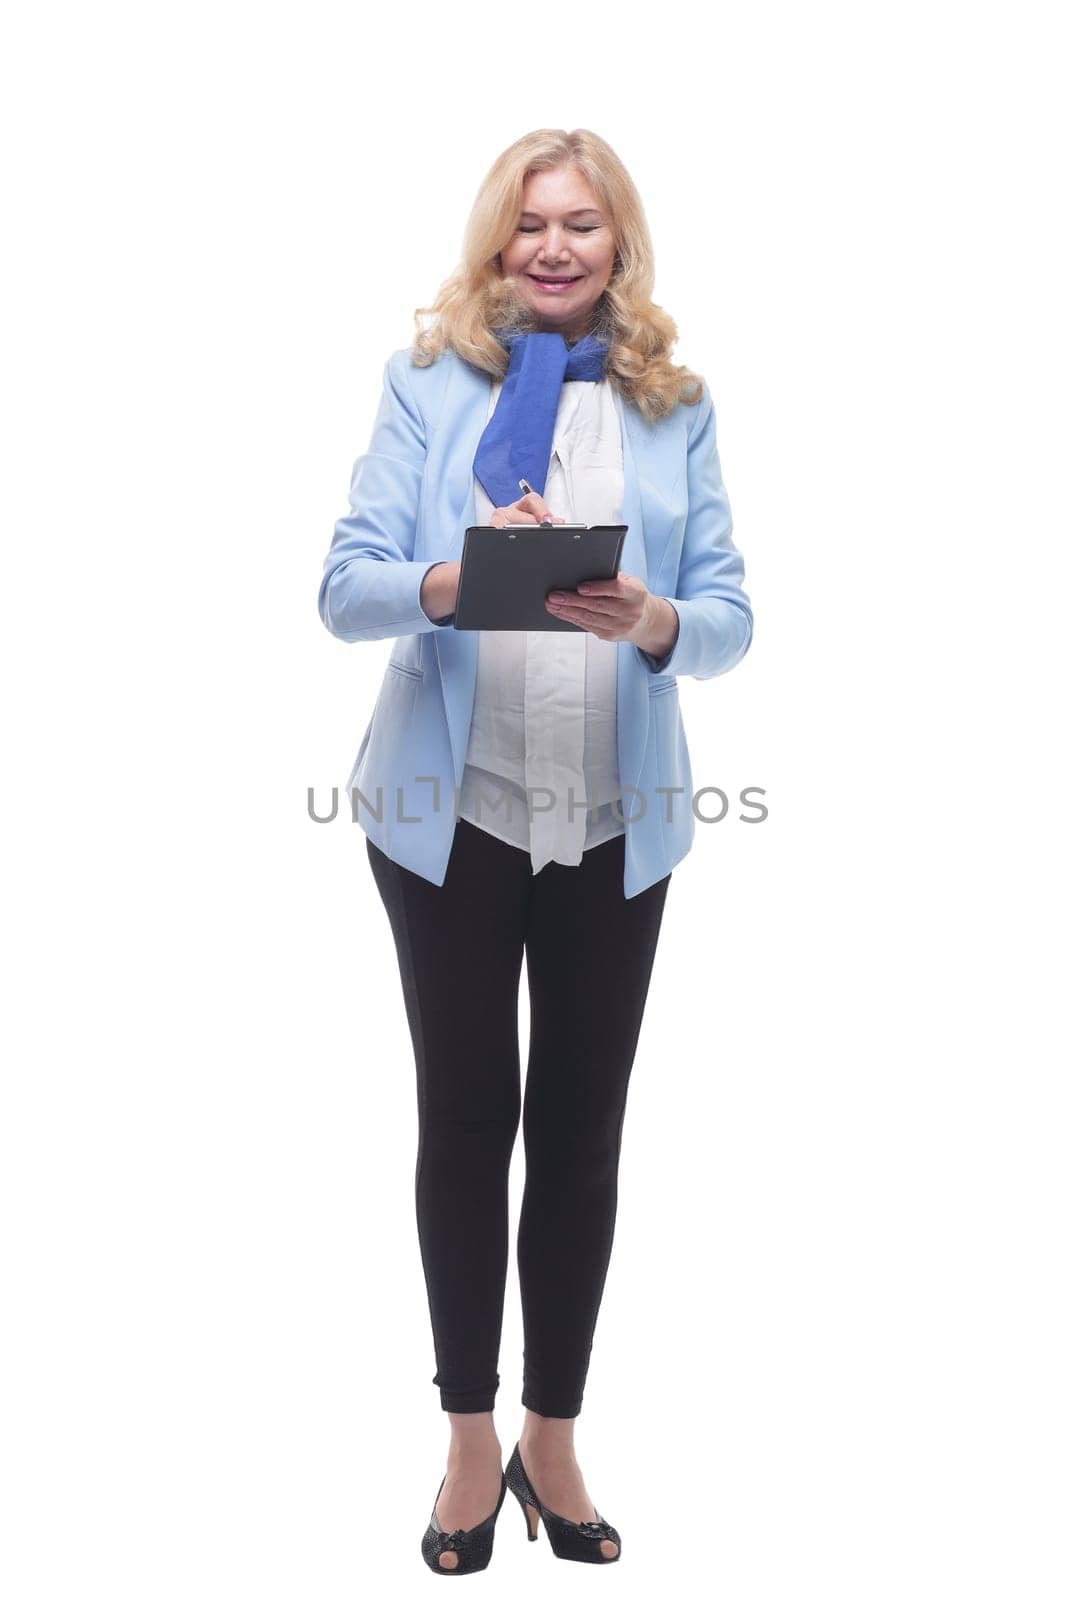 in full growth.Mature woman with clipboard . isolated on a white background.